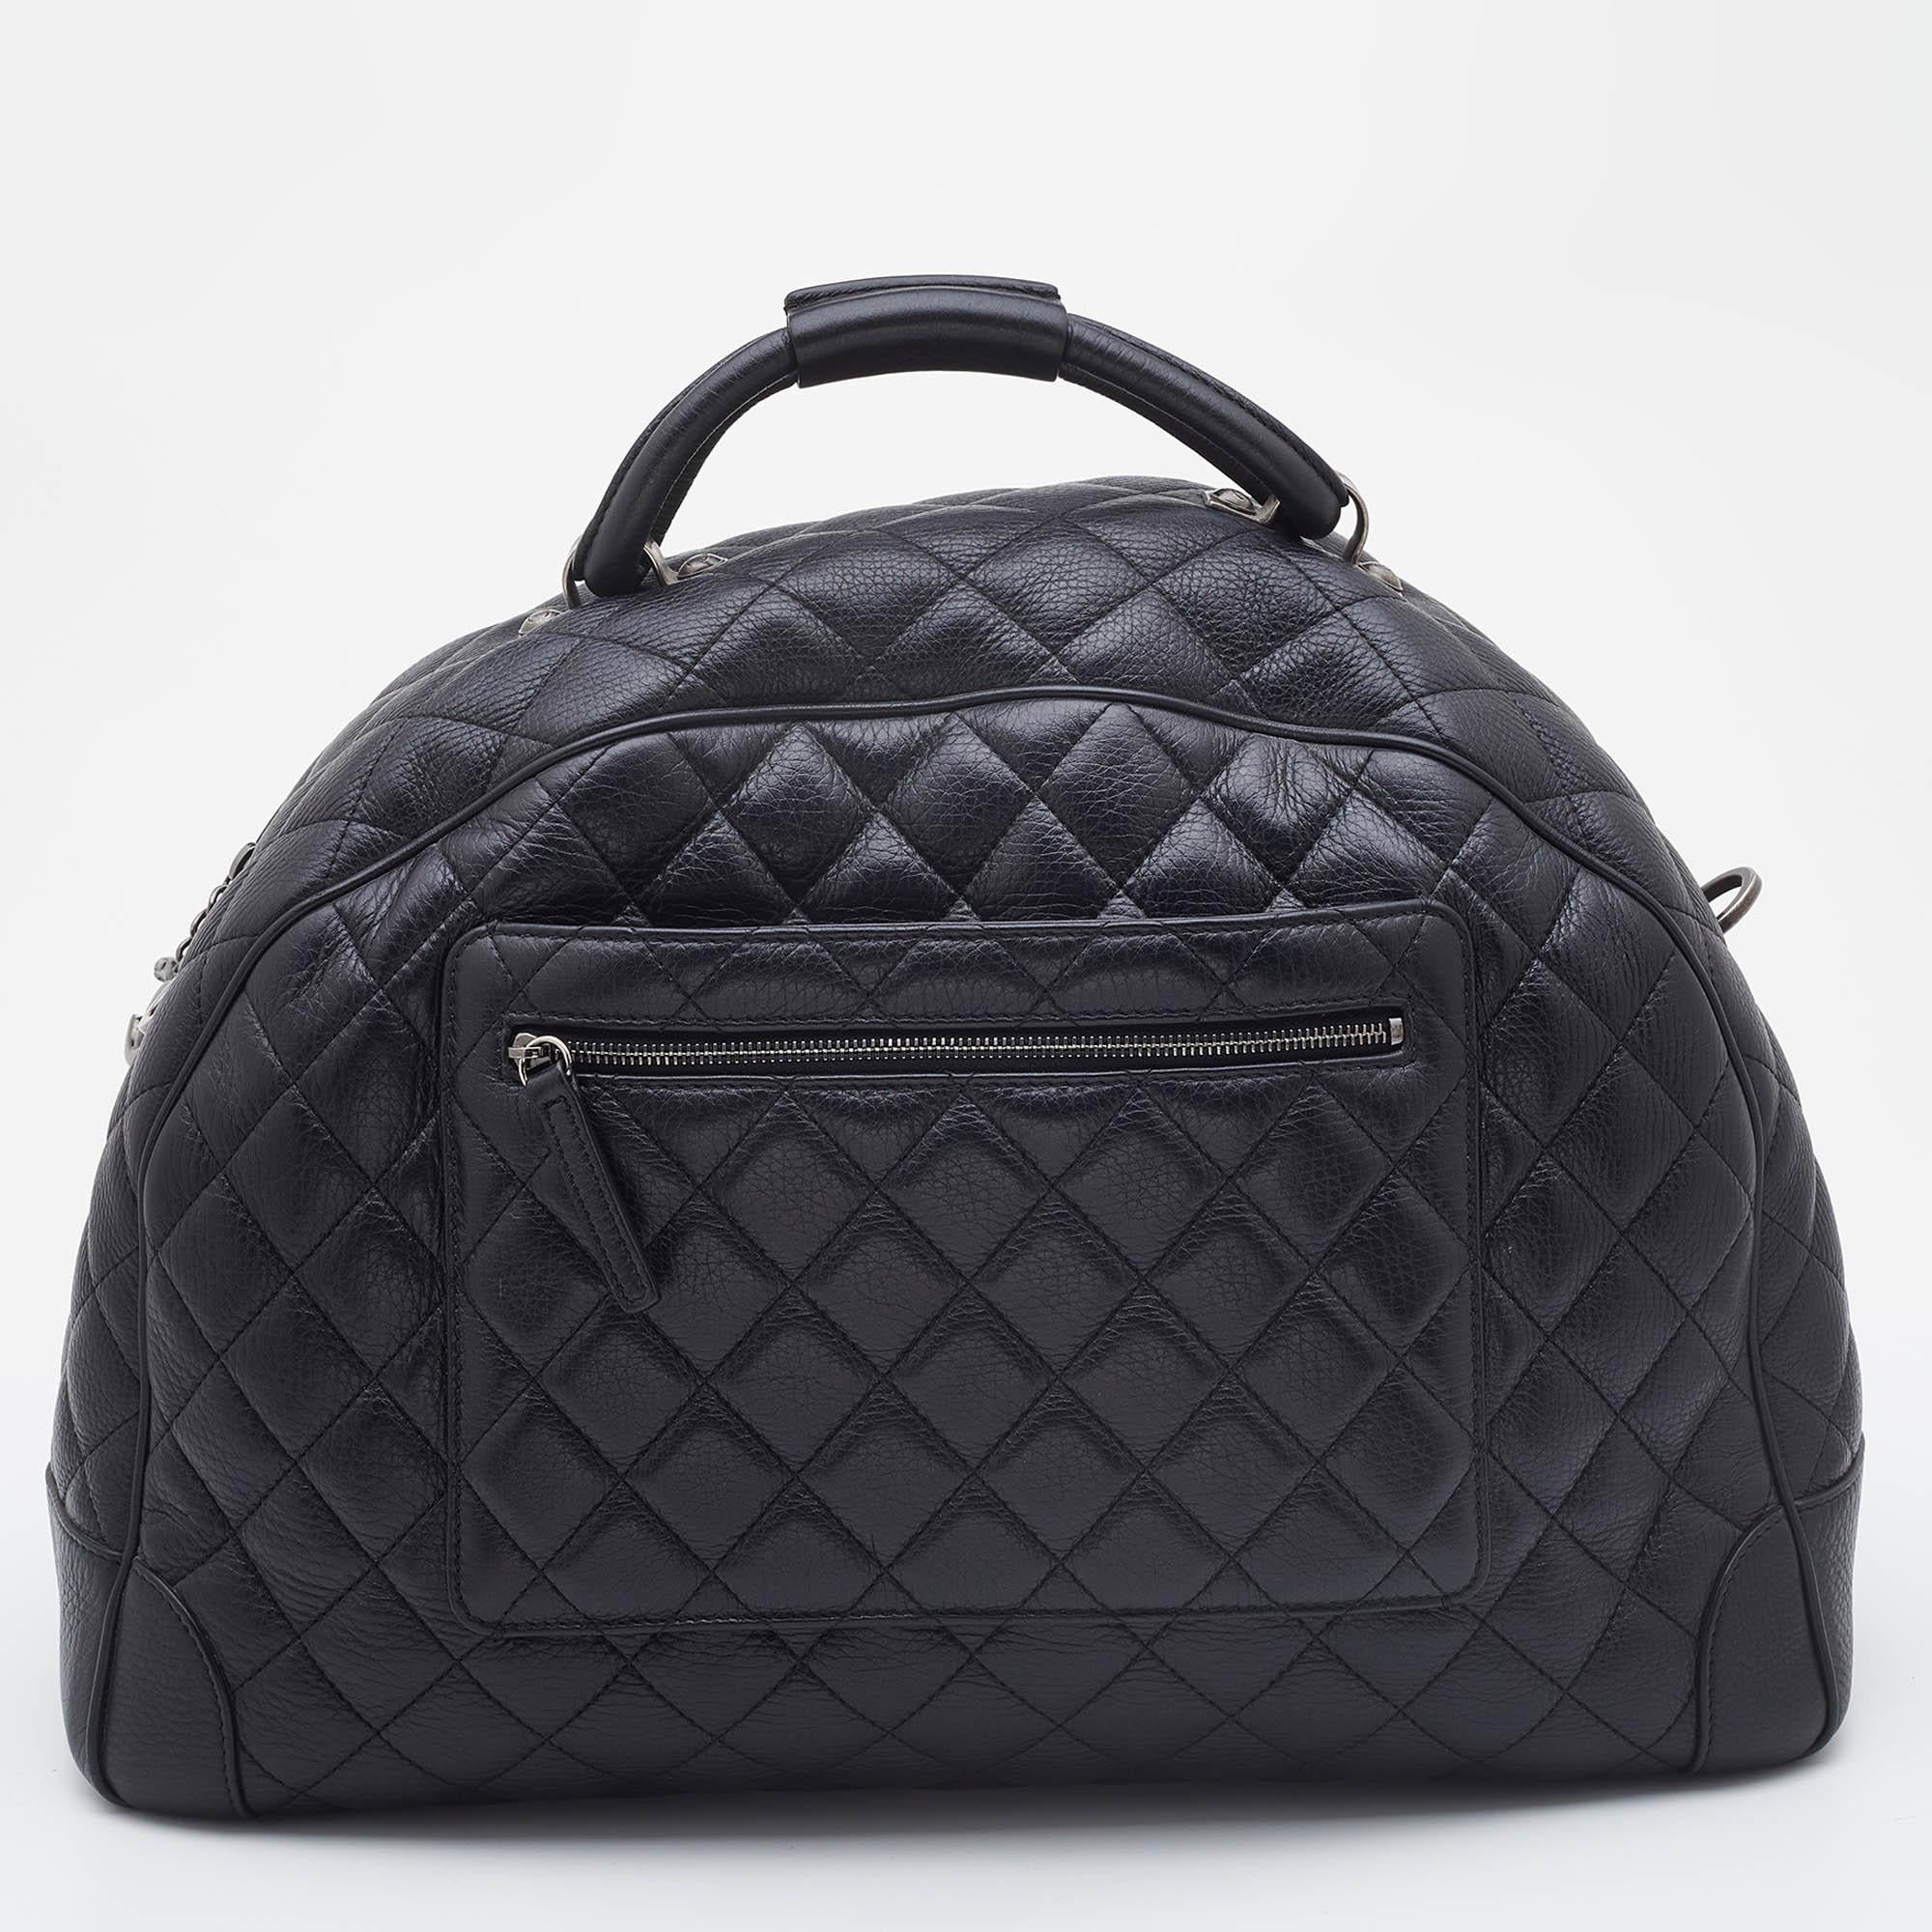 Striking a beautiful balance between essentiality and opulence, this Airlines Round Trip bag from the House of Chanel ensures that your handbag requirements are taken care of. It is equipped with practical features for all-day ease.

Includes: